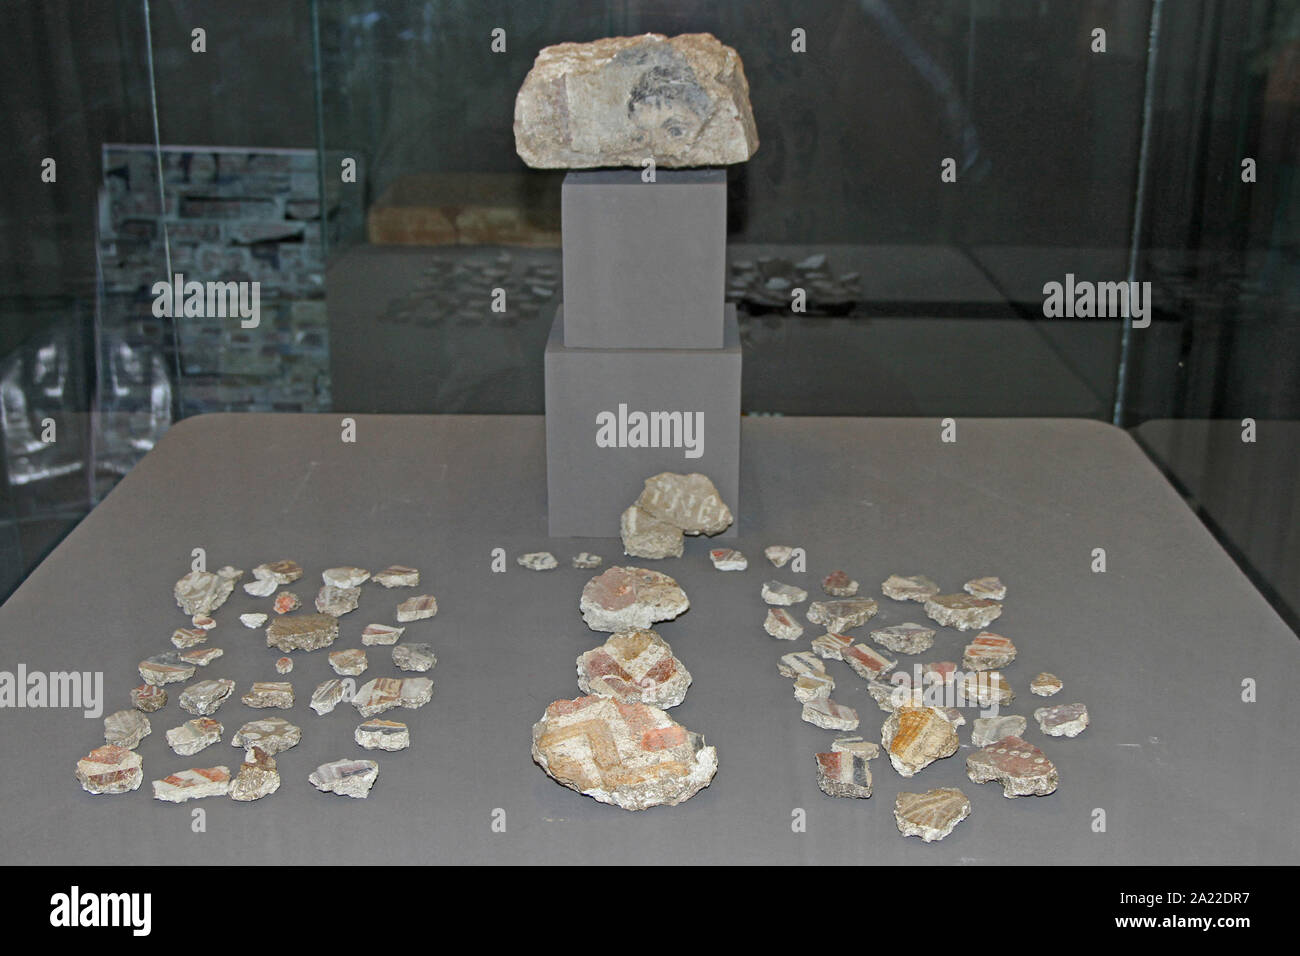 Collection of ancient prehistoric dug up stone fossil fragments in glass display at National Archaeological Museum Djerdap, Kladovo, Serbia. Stock Photo